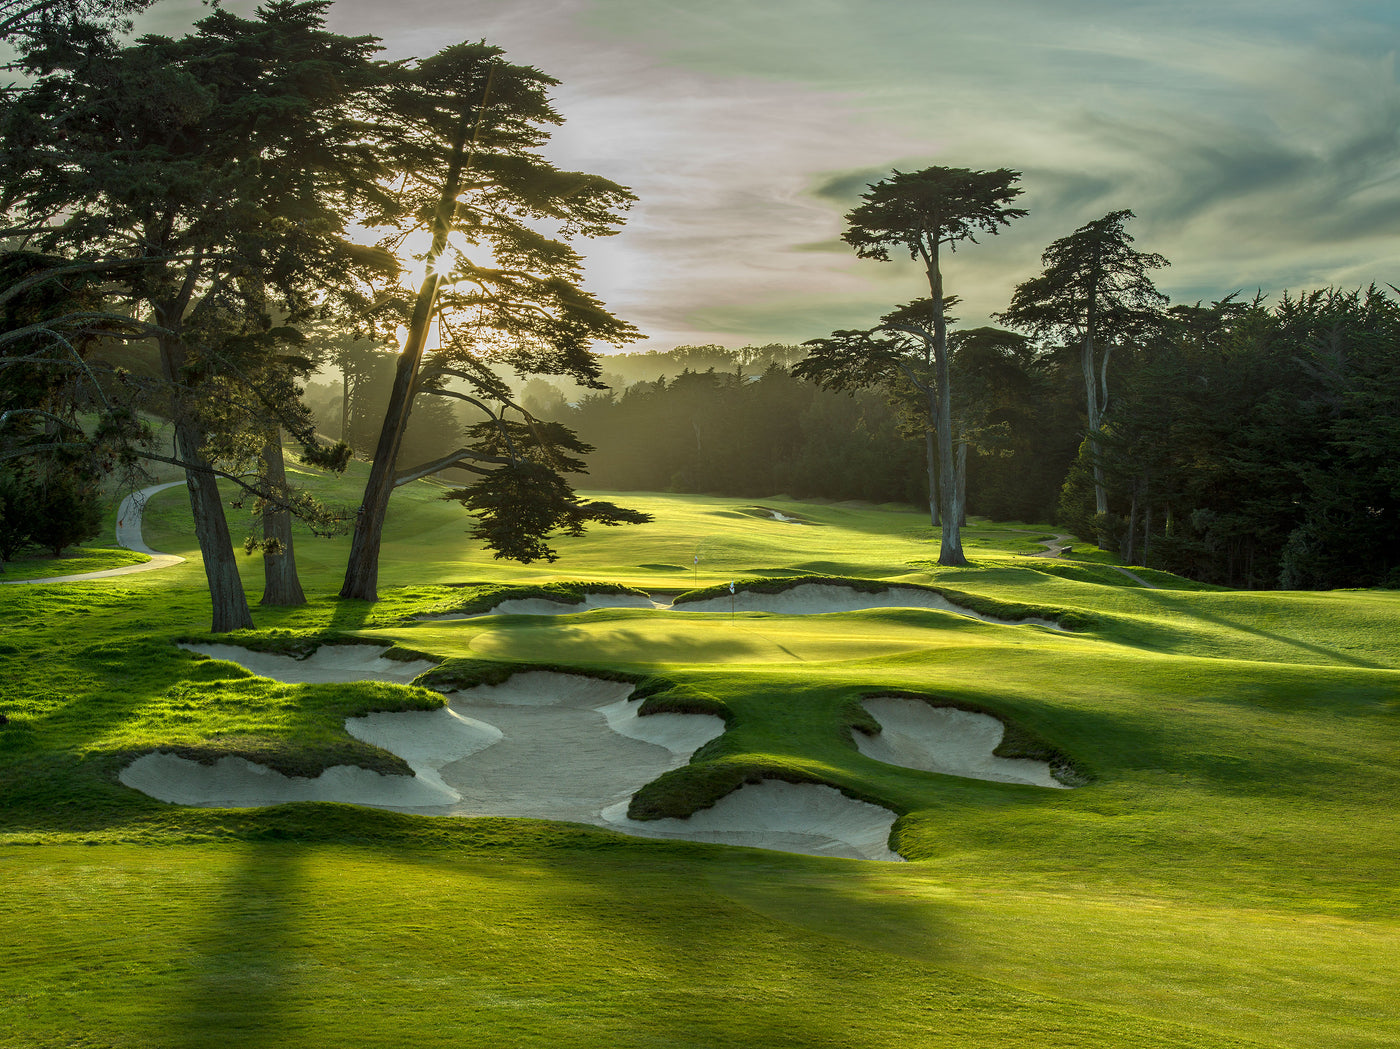 The late afternoon light streaming through the trees on the 3rd hole of The California Golf Club aka The Cal Club.  